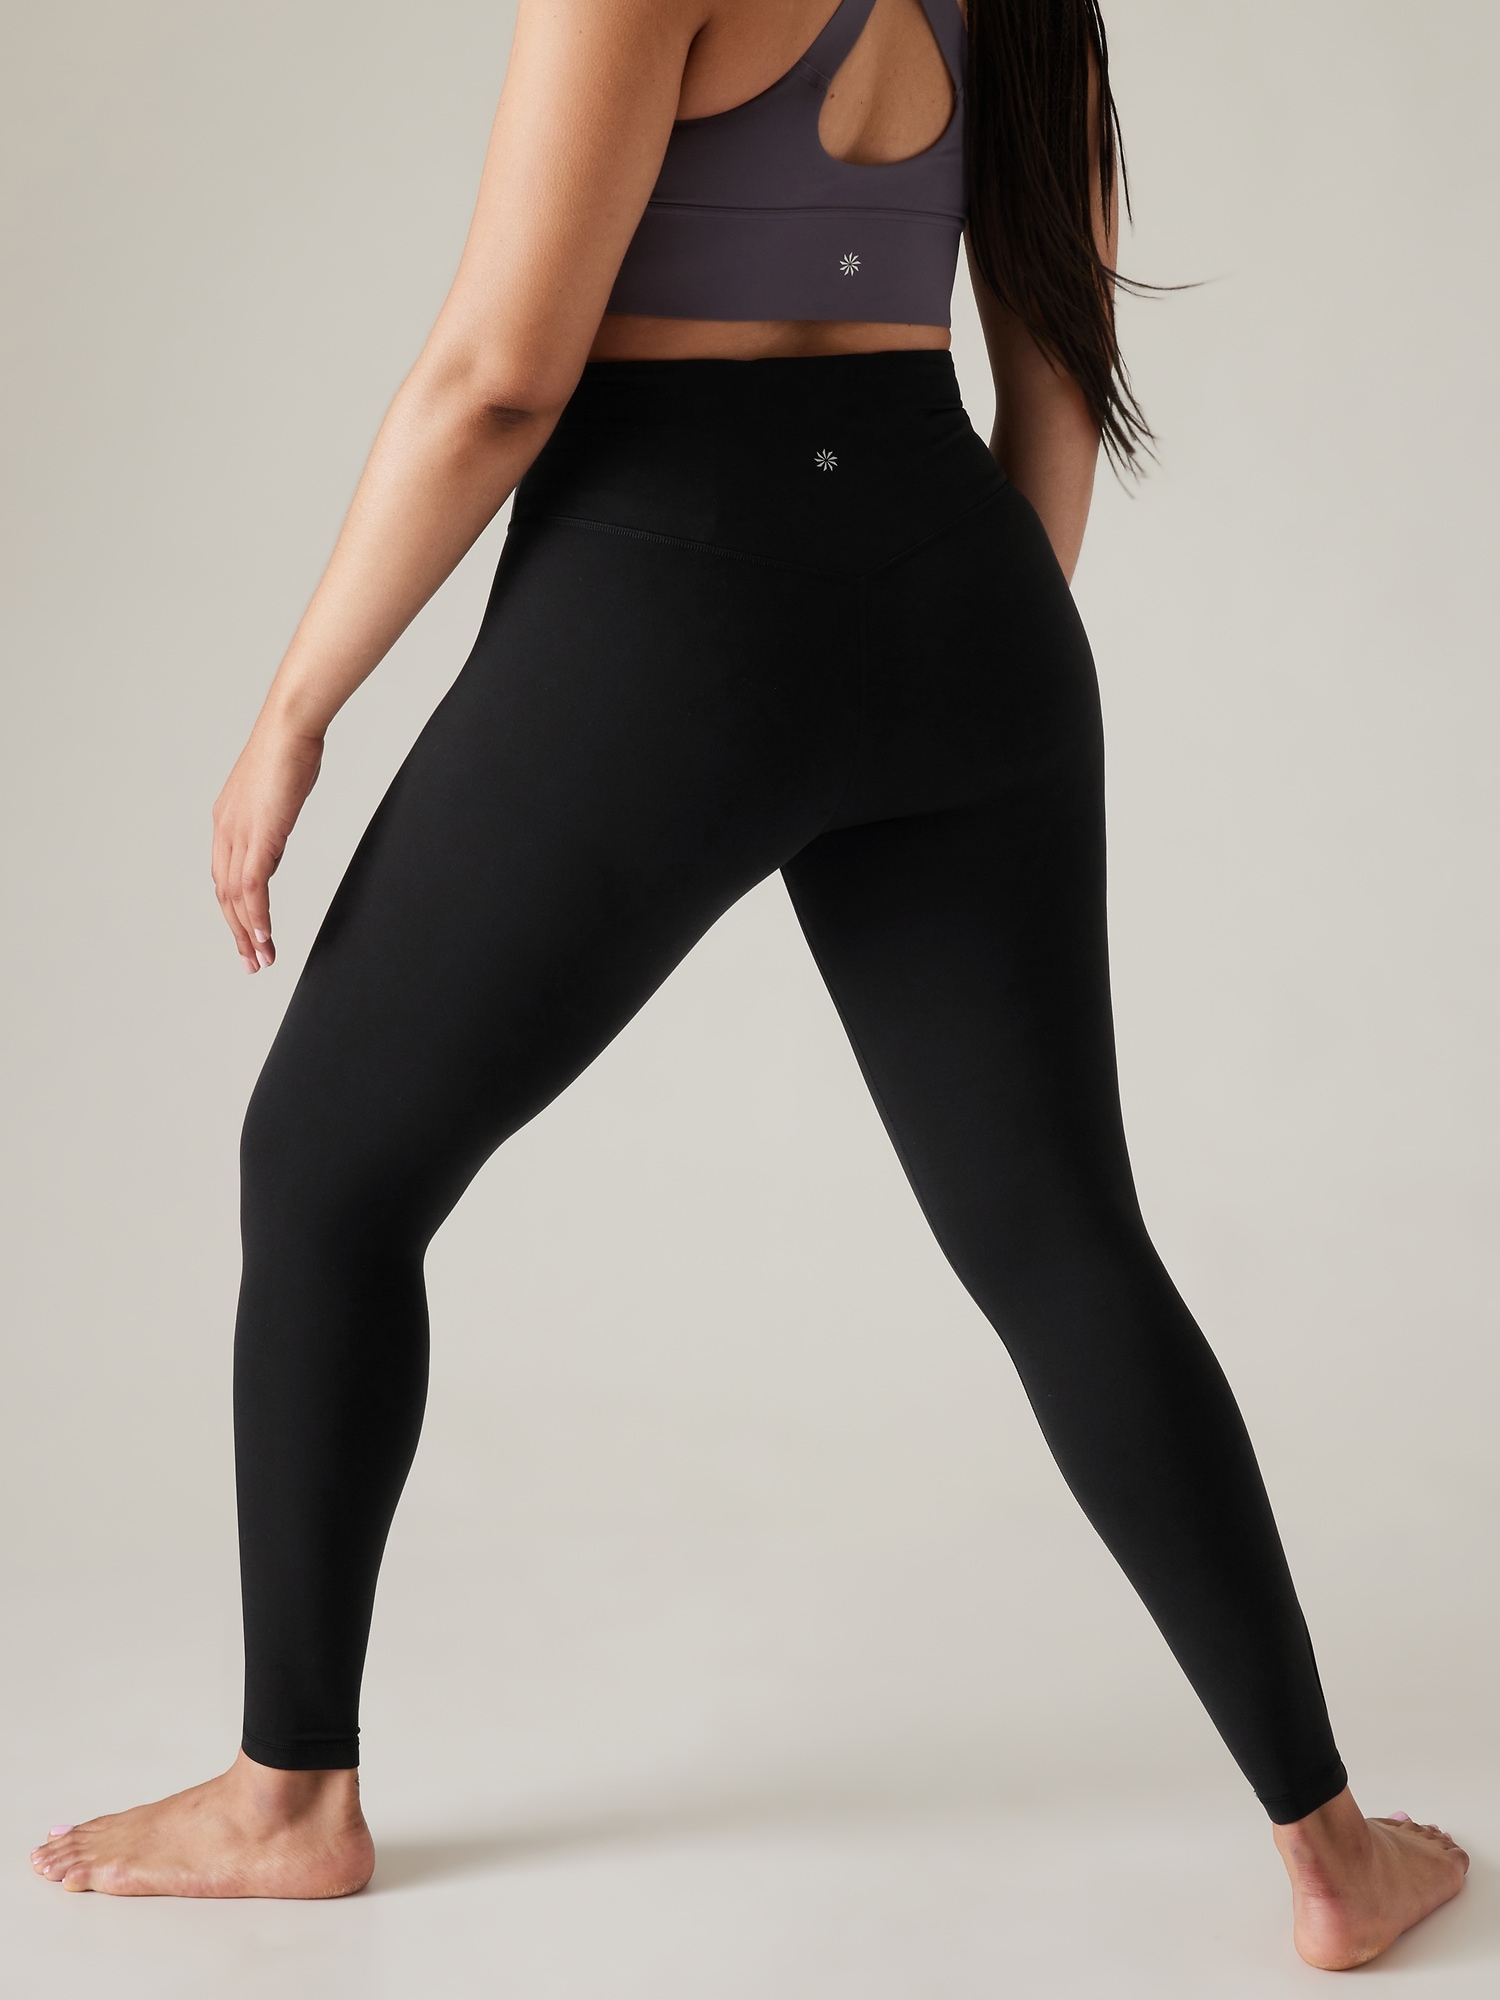 Every Day Leggings in Black (XL 2x 3x Only)